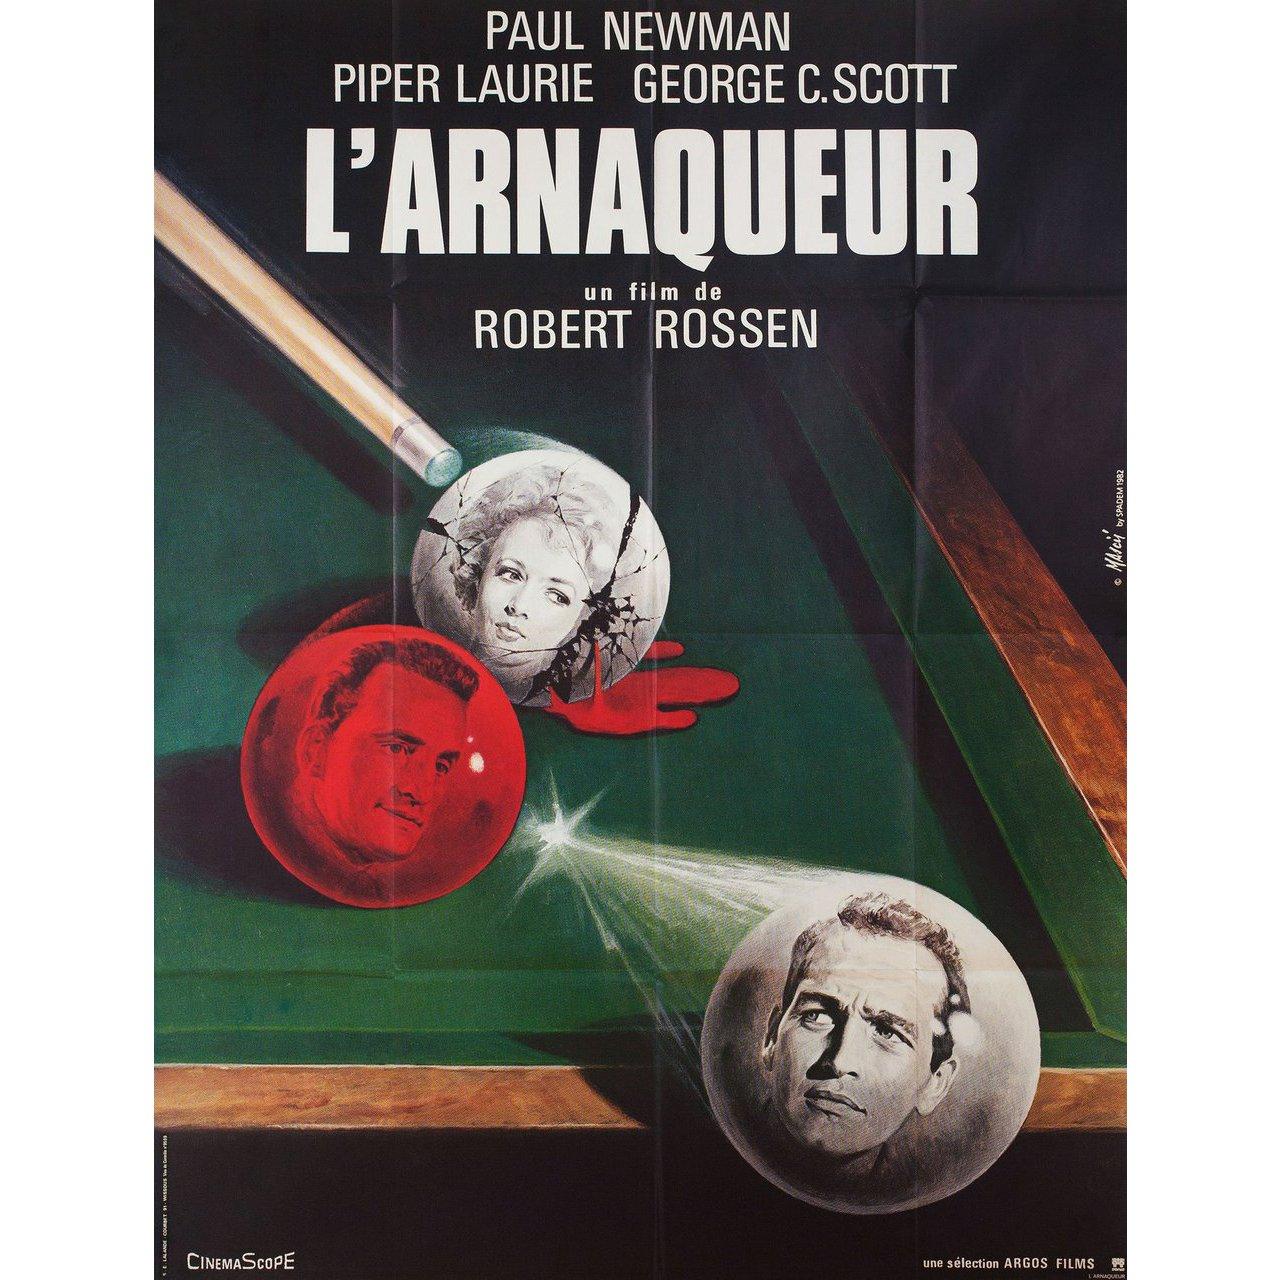 Original 1982 re-release French grande poster by Jean Mascii for the 1961 film The Hustler directed by Robert Rossen with Paul Newman / Jackie Gleason / Piper Laurie / George C. Scott. Fine condition, folded. Many original posters were issued folded